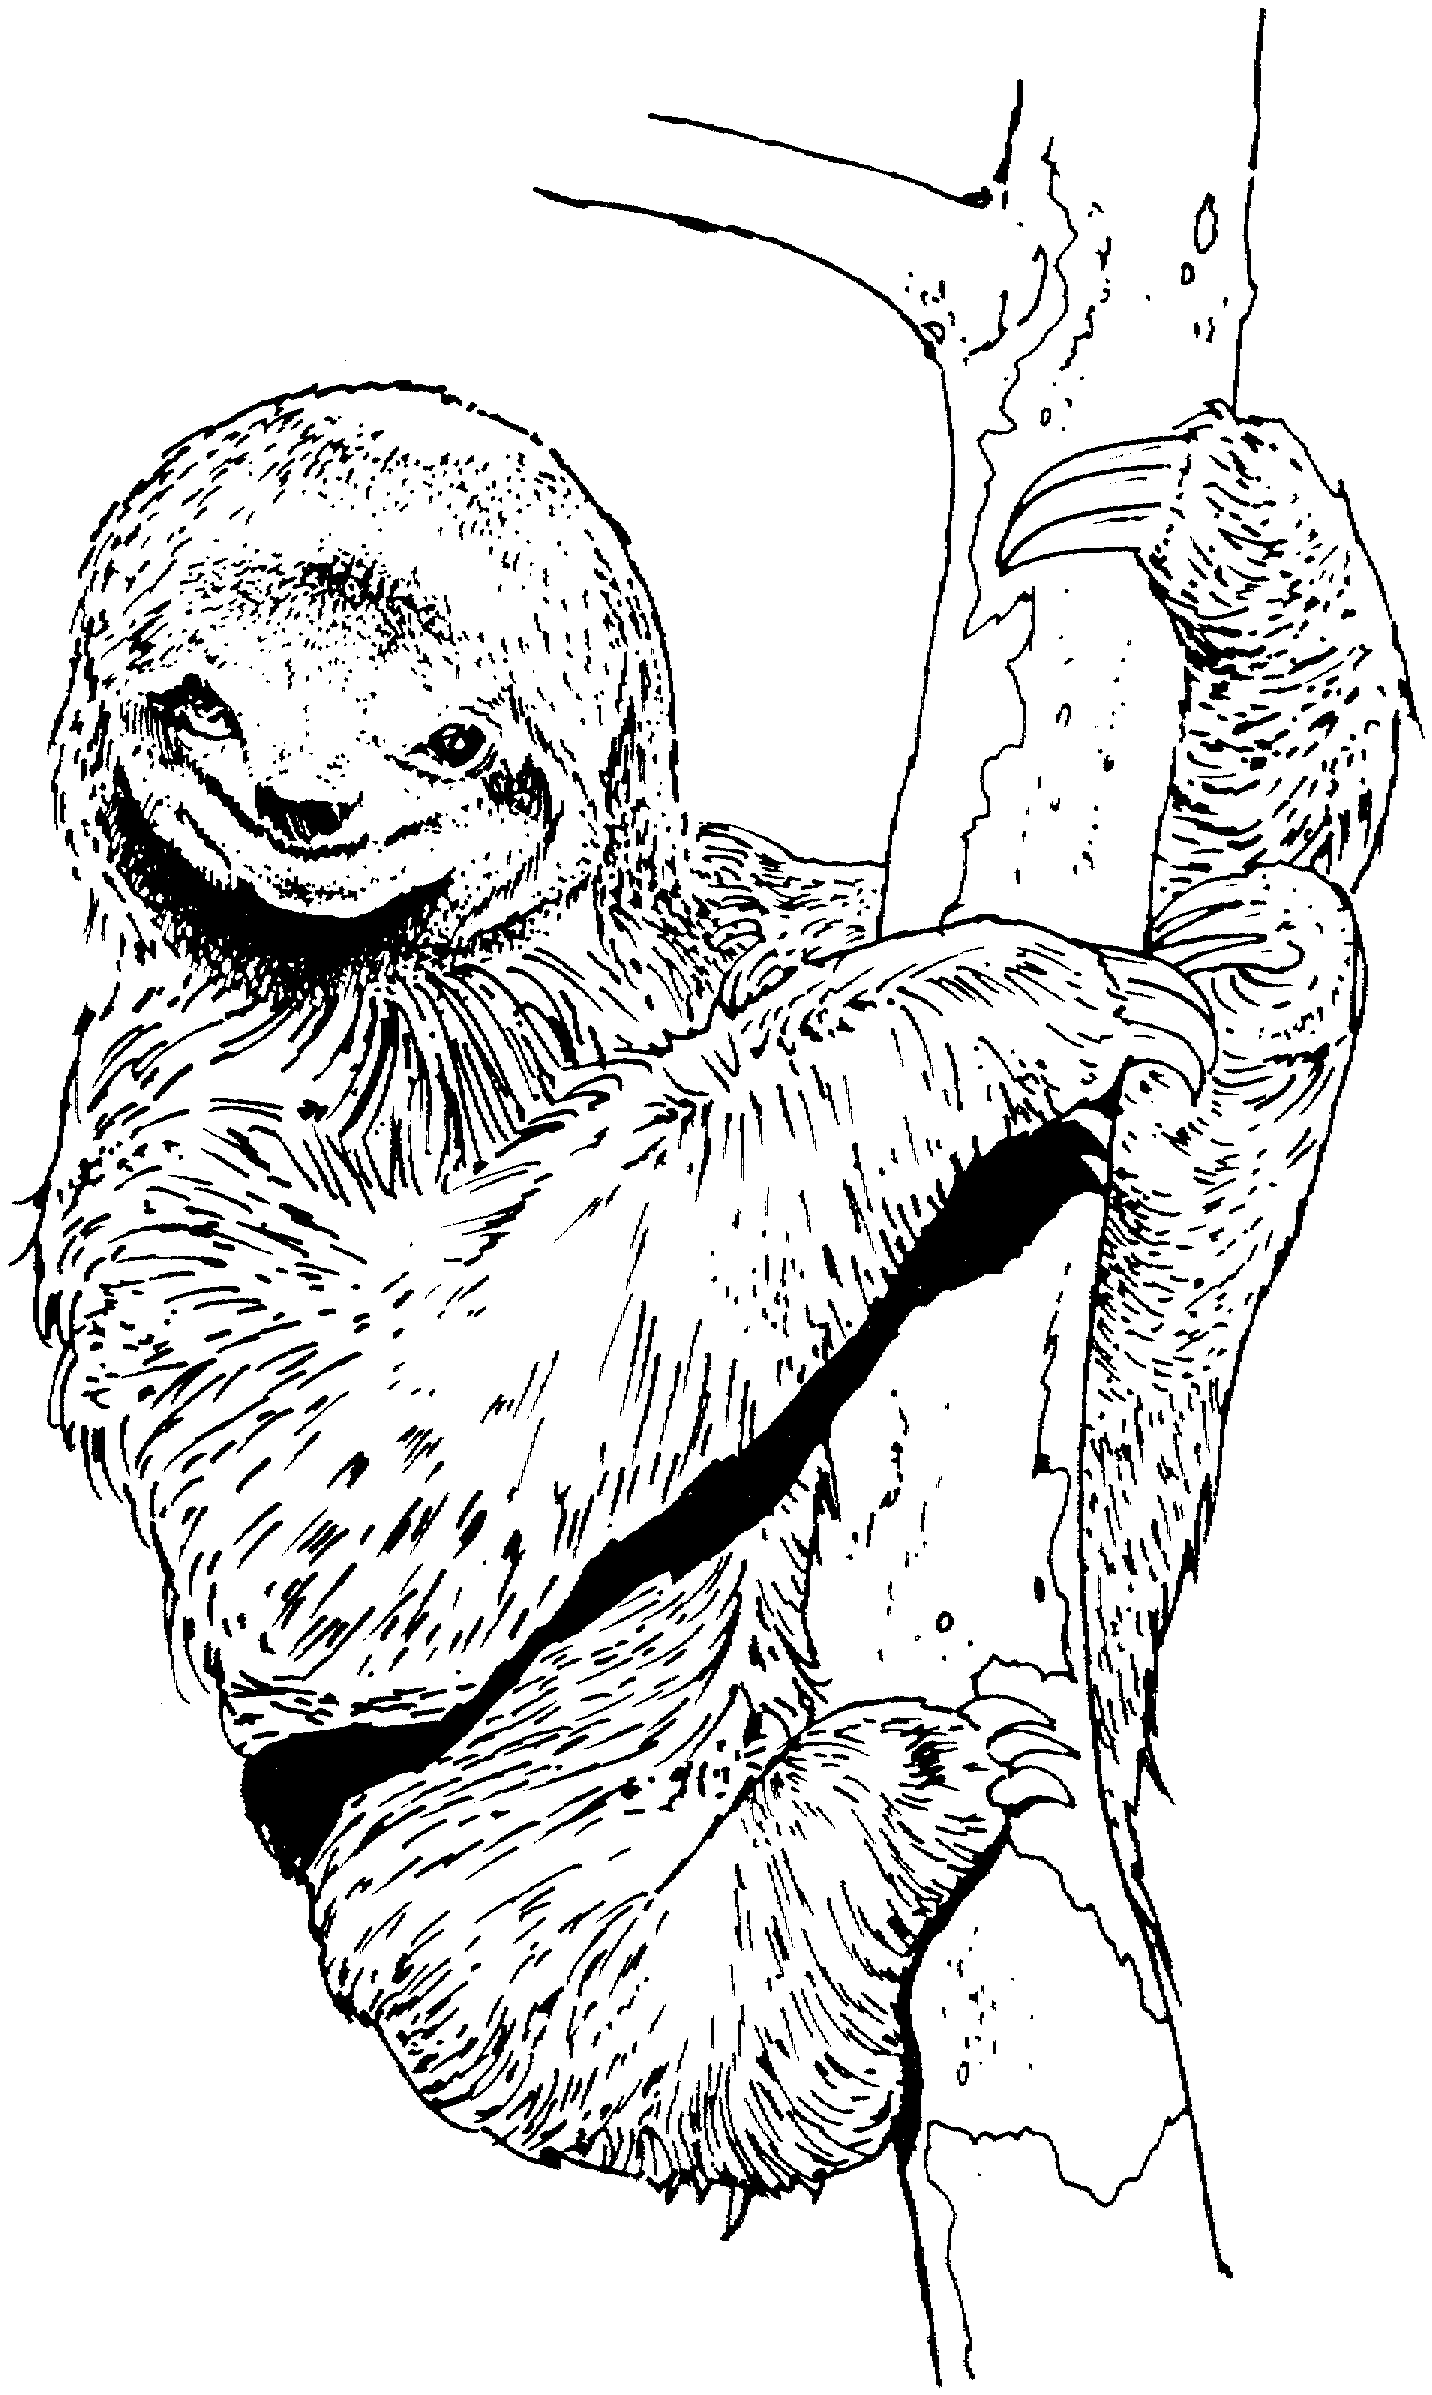 Sloth Coloring Pages - Best Coloring Pages For Kids